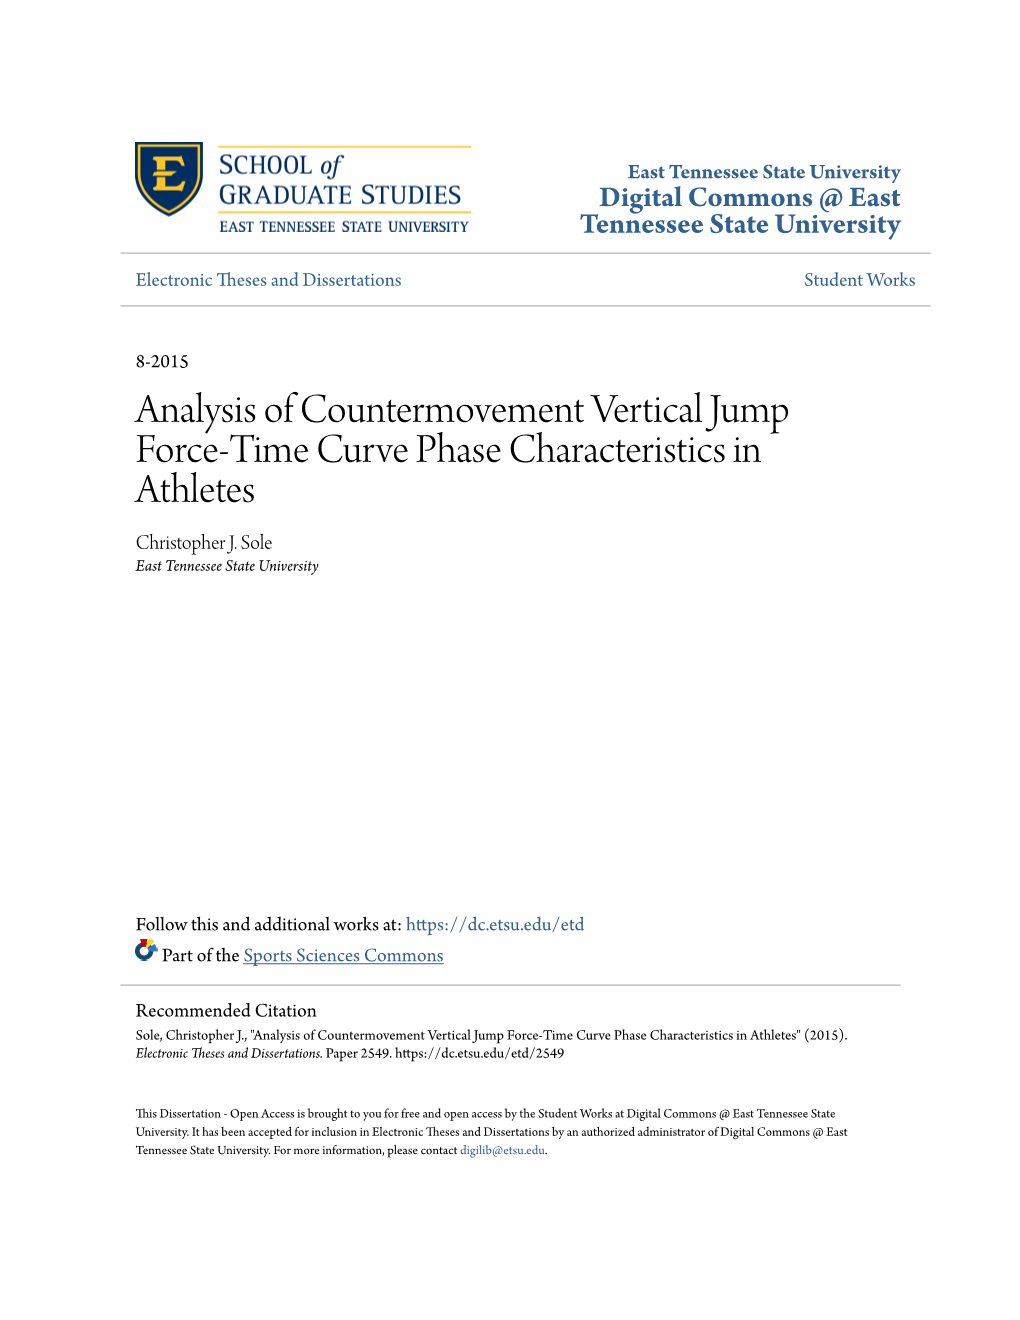 Analysis of Countermovement Vertical Jump Force-Time Curve Phase Characteristics in Athletes Christopher J